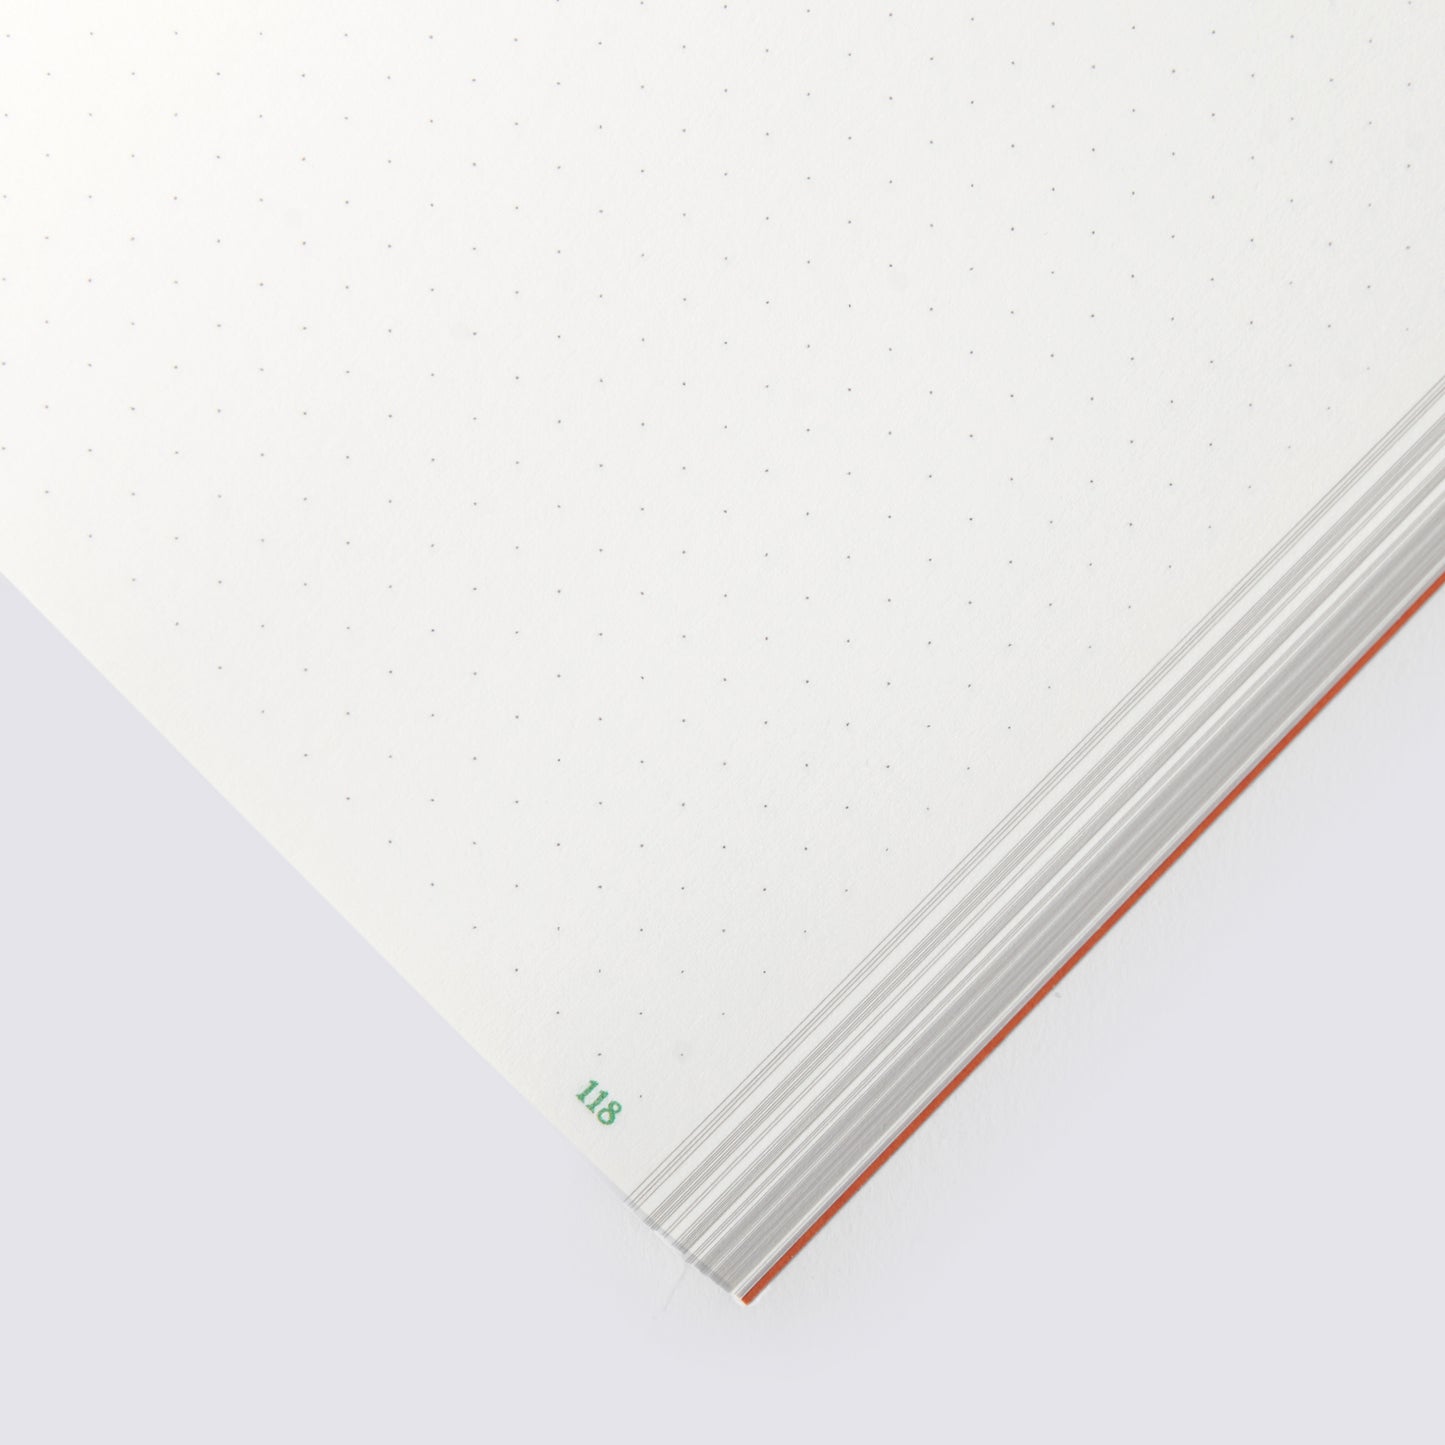 Yolk Notebook and Pen Duo - Everyday Pen / Dot Grid Paper